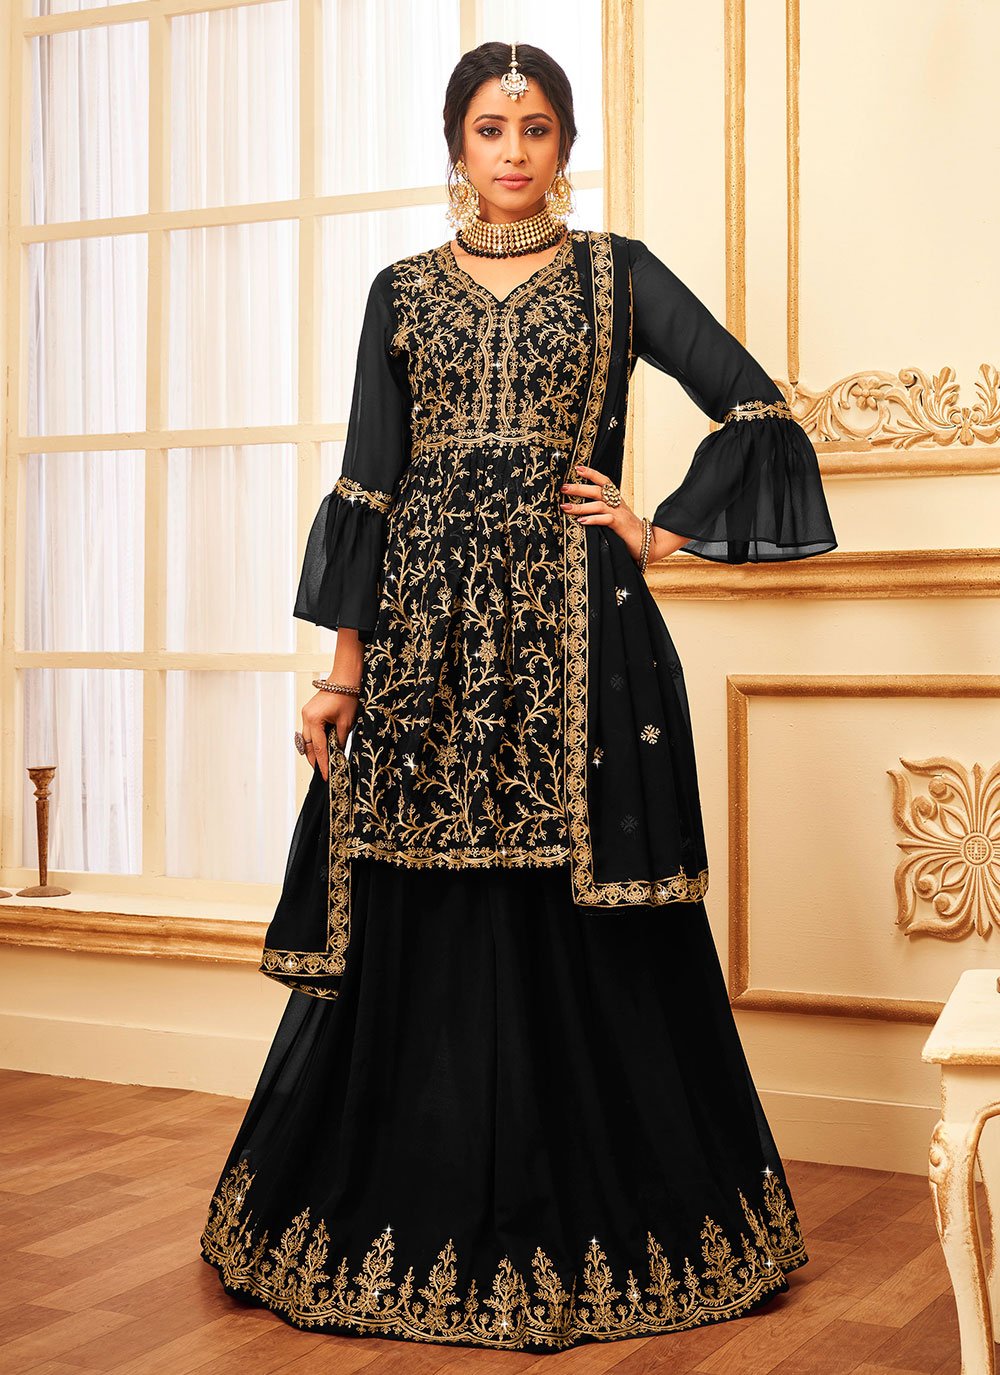 Embroidered Georgette Palazzo Salwar Suit